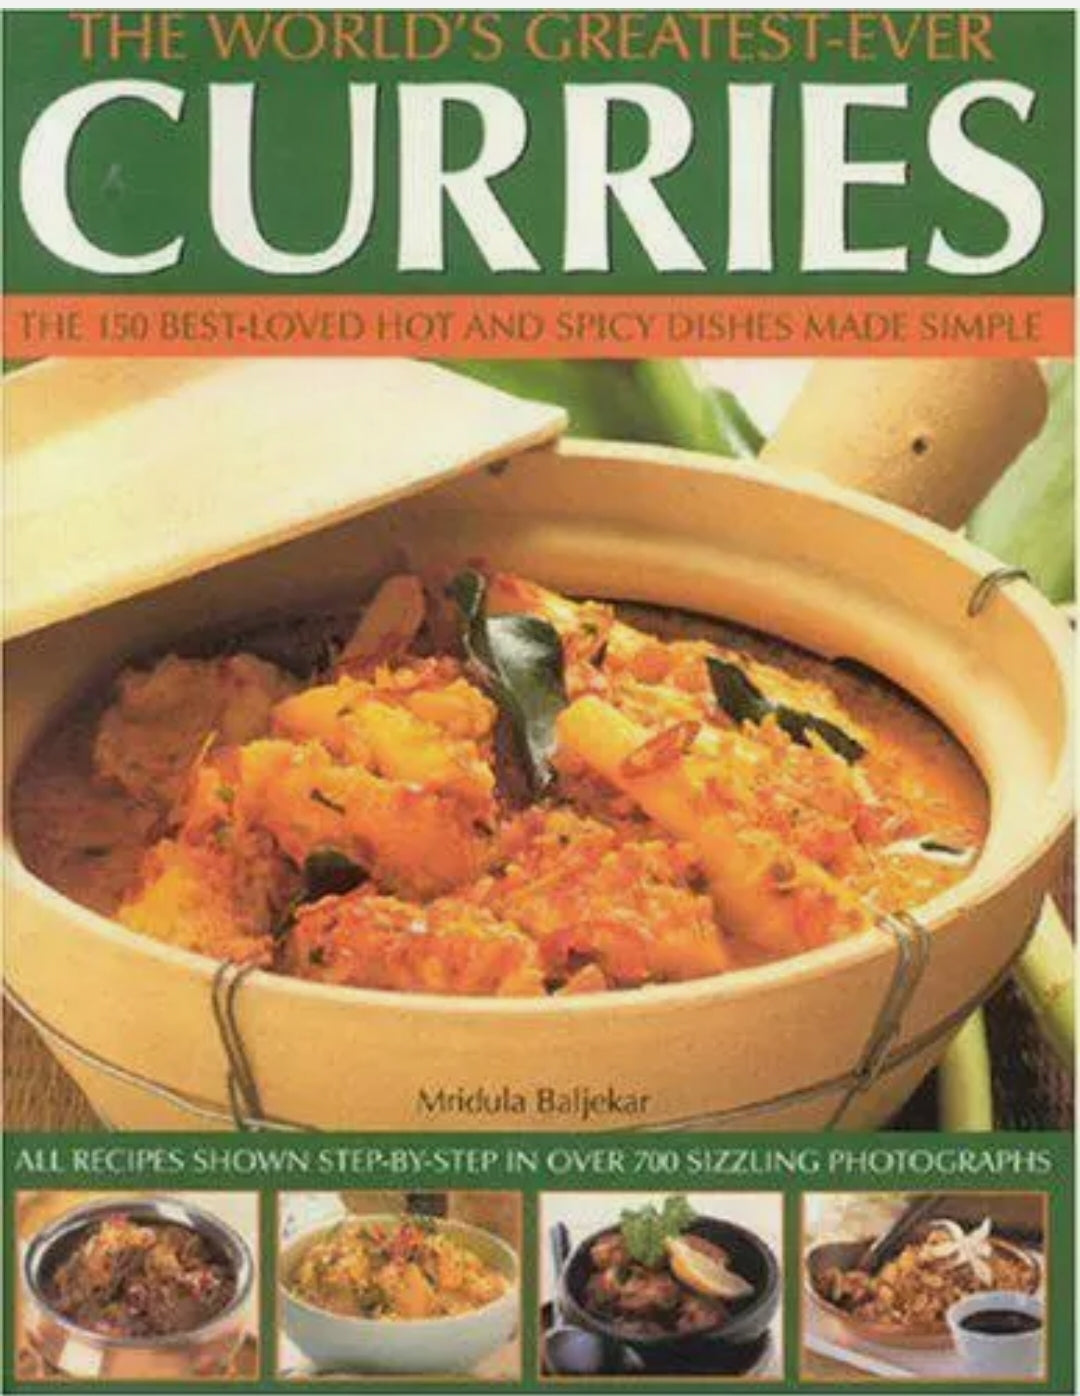 The World's Greatest-ever Curries: All Recipes Shown Step-by-step in Over 700 Photographs